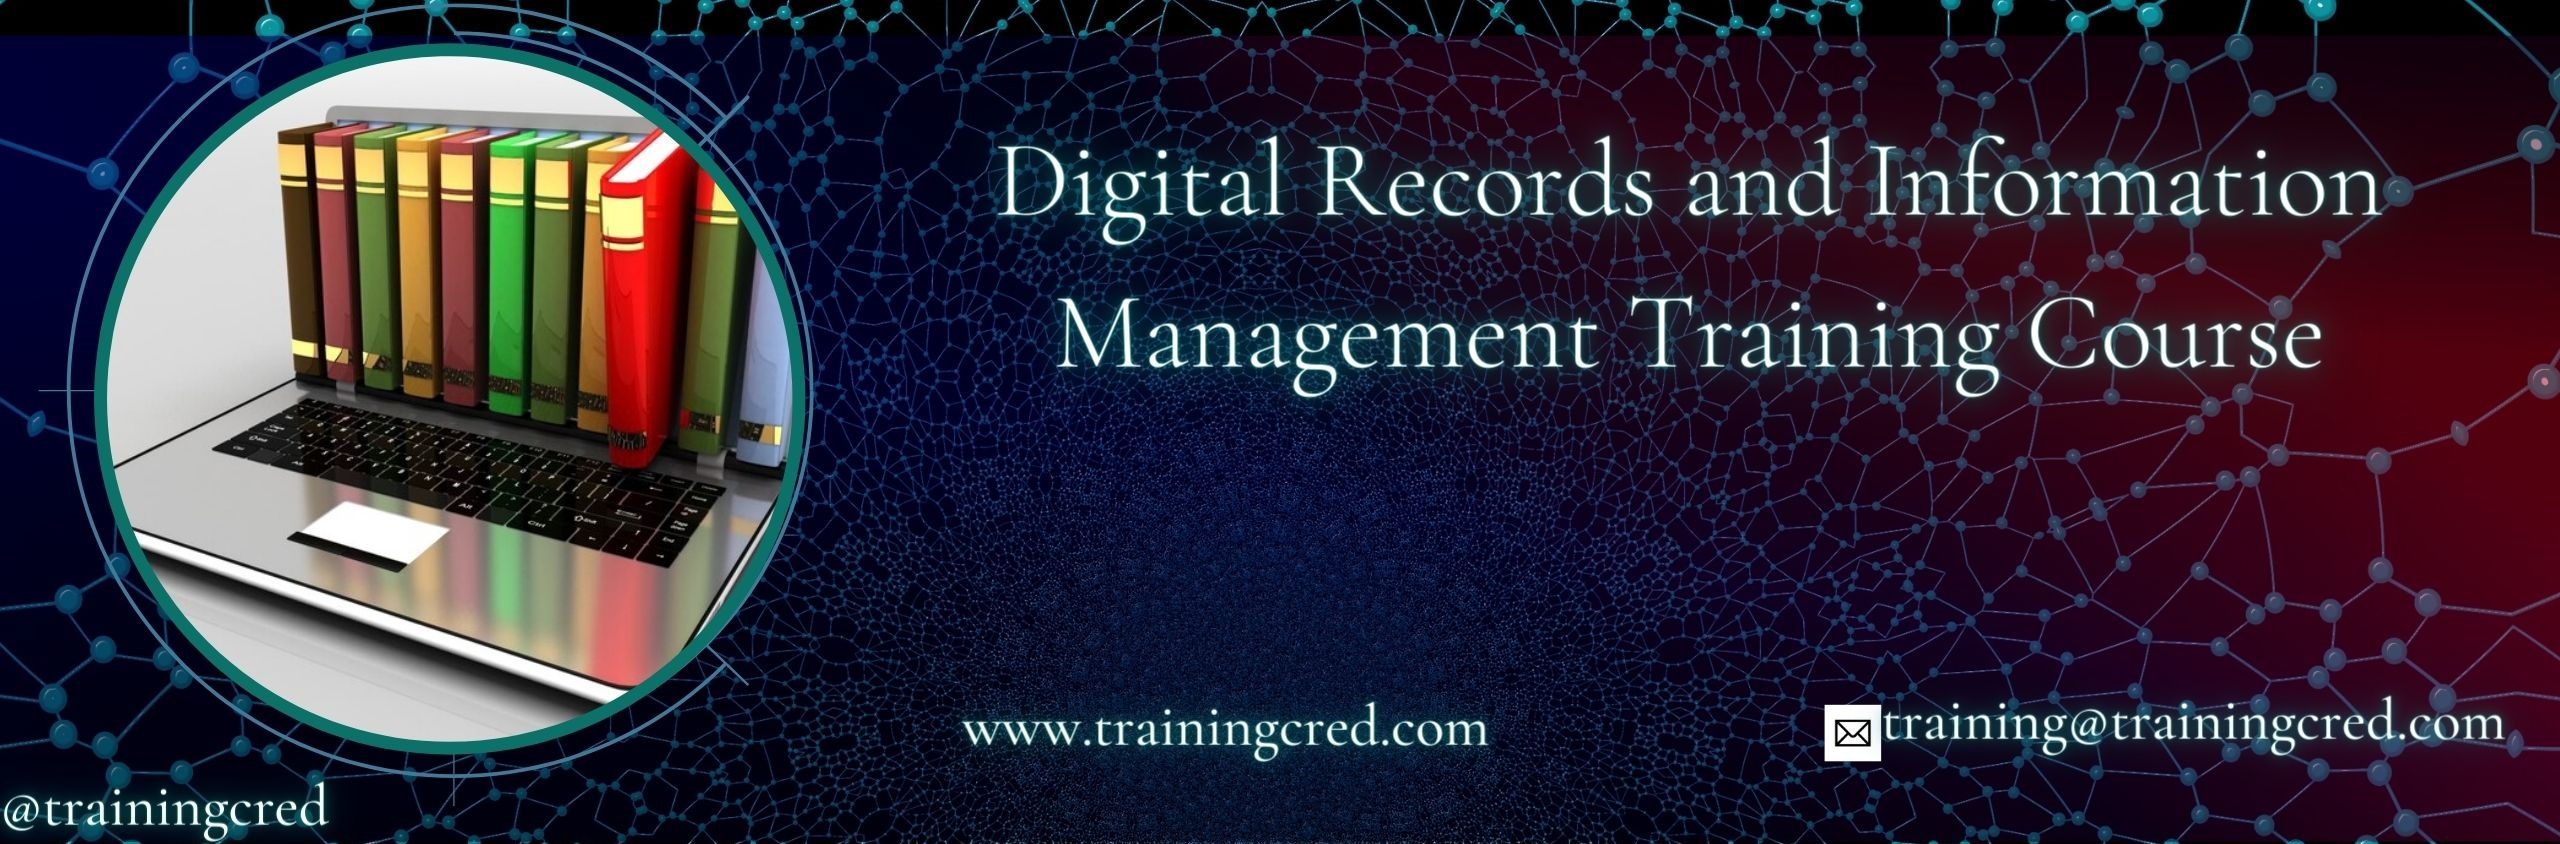 Digital Records and Information Management Training